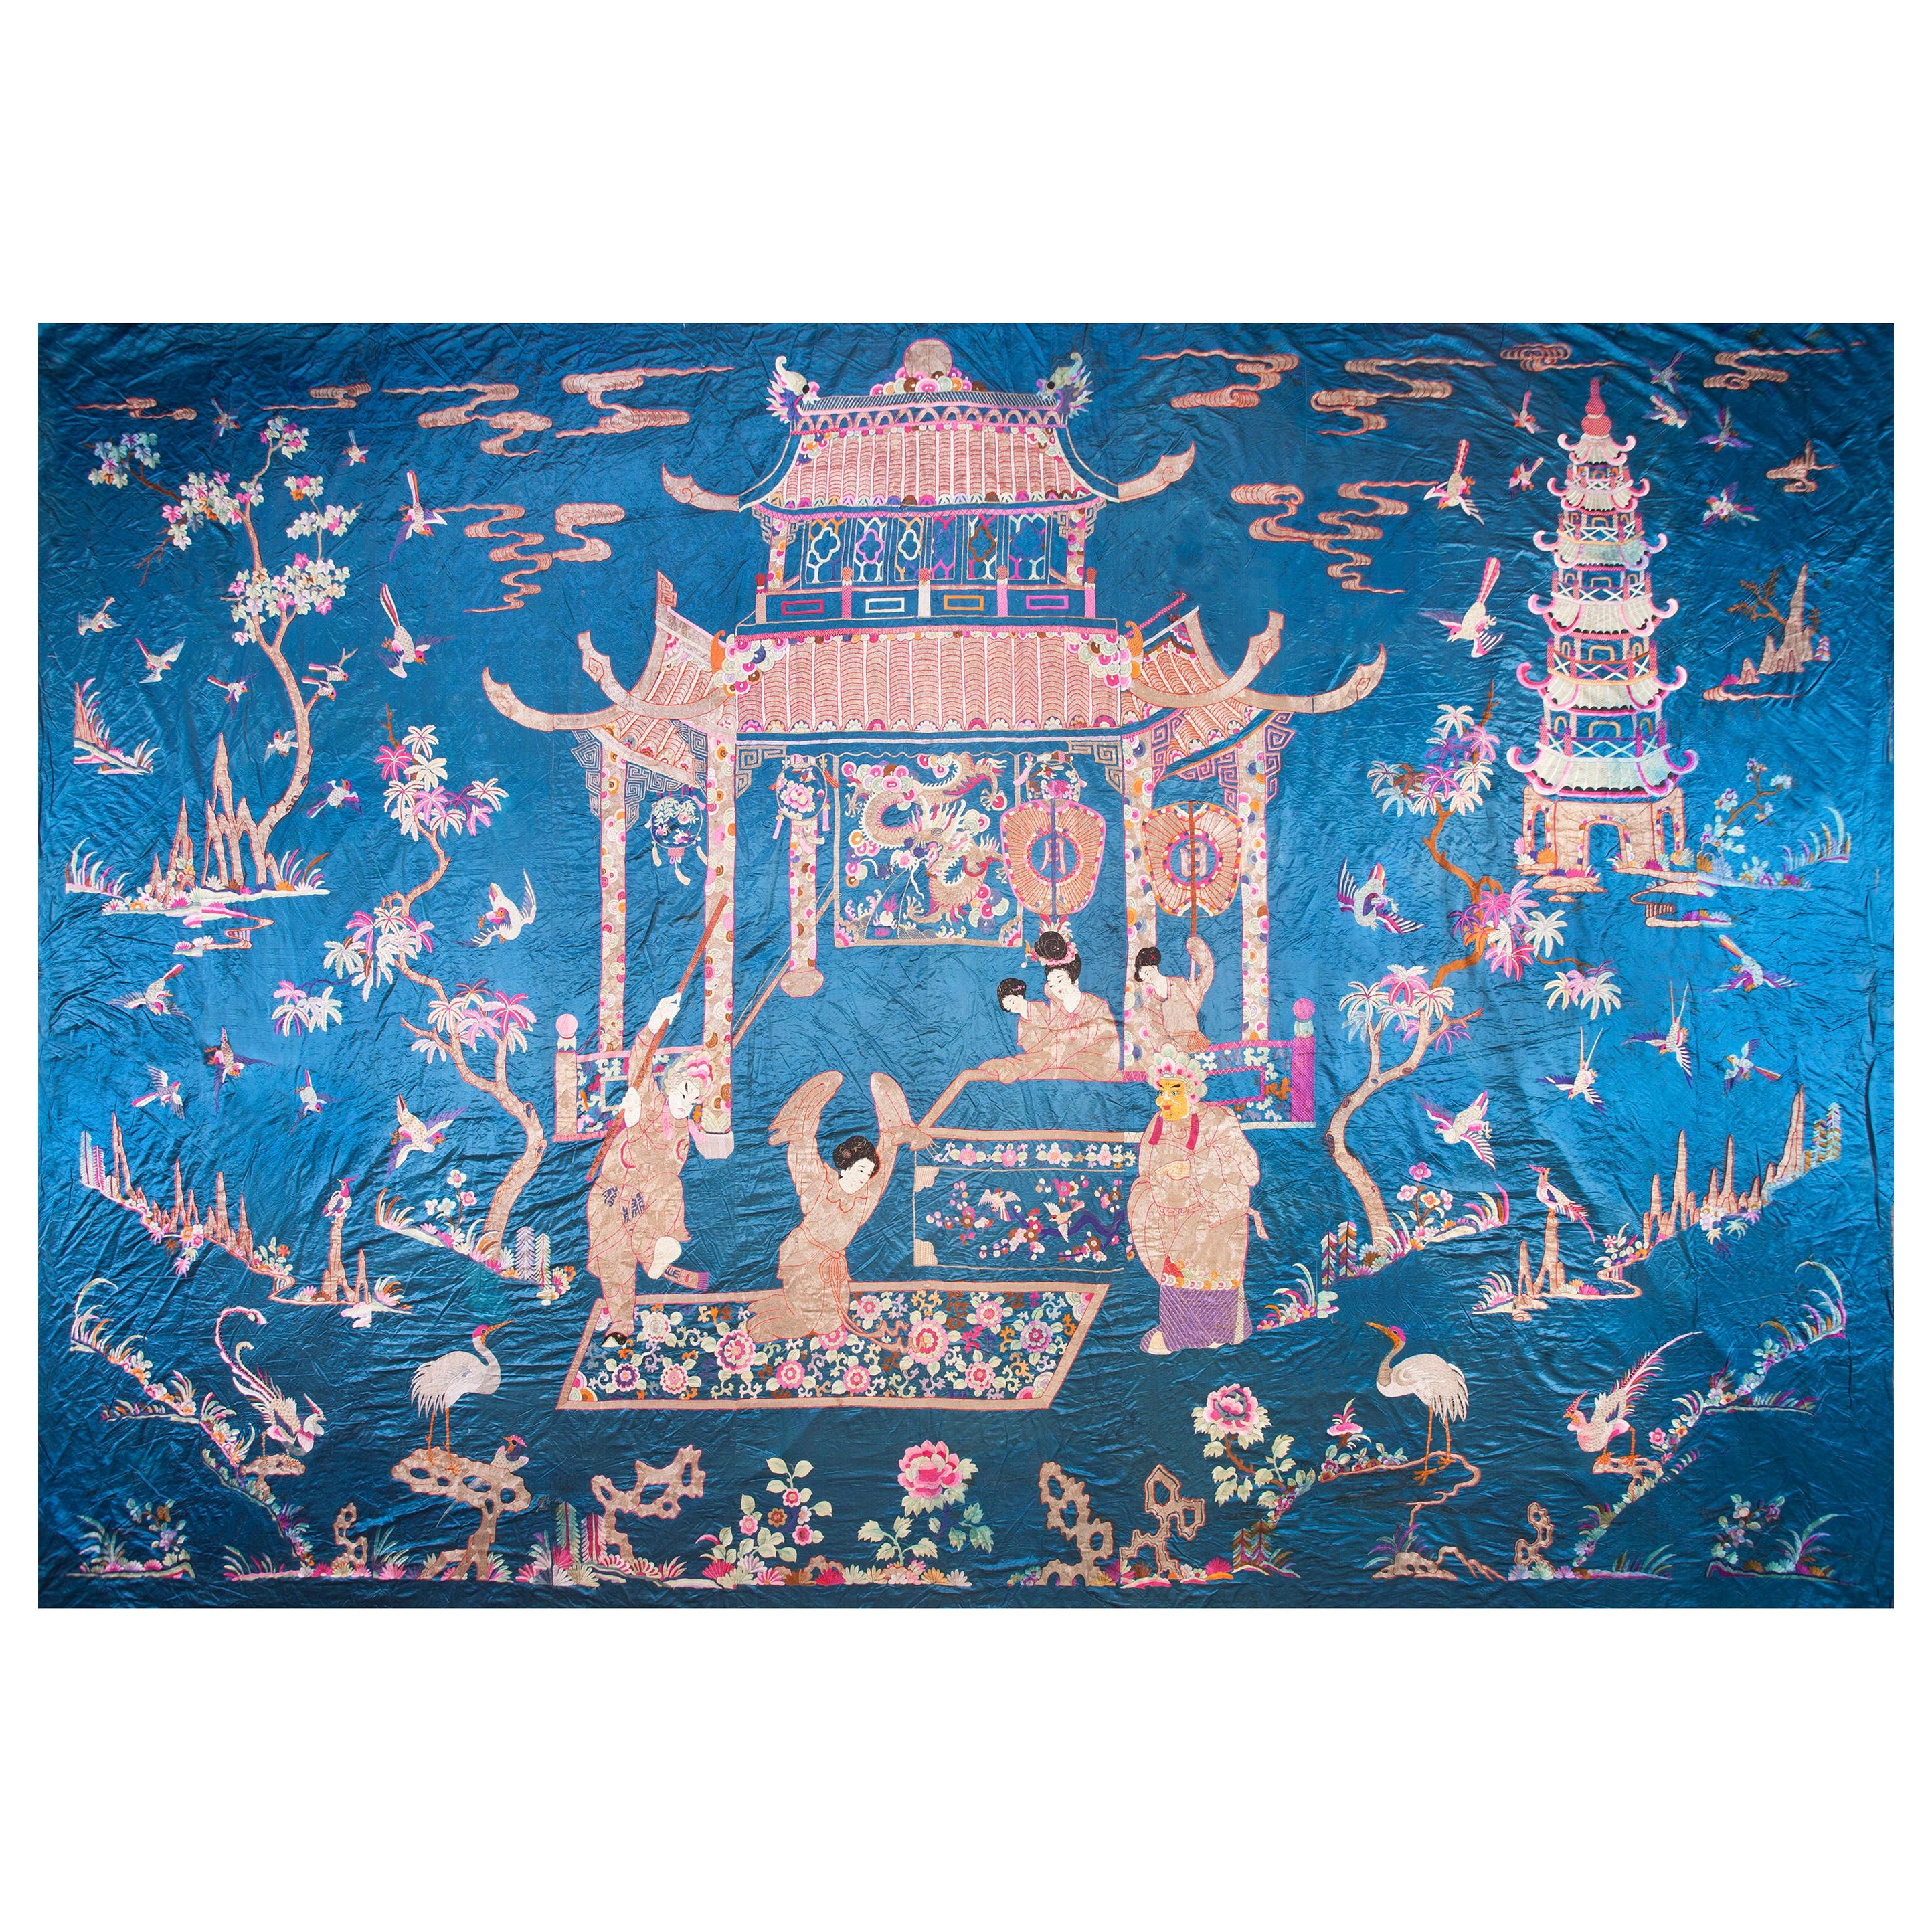 Early 20th Century Chinese Silk Embroidery ( 16'6" x 22' - 503 x 670 ) For Sale